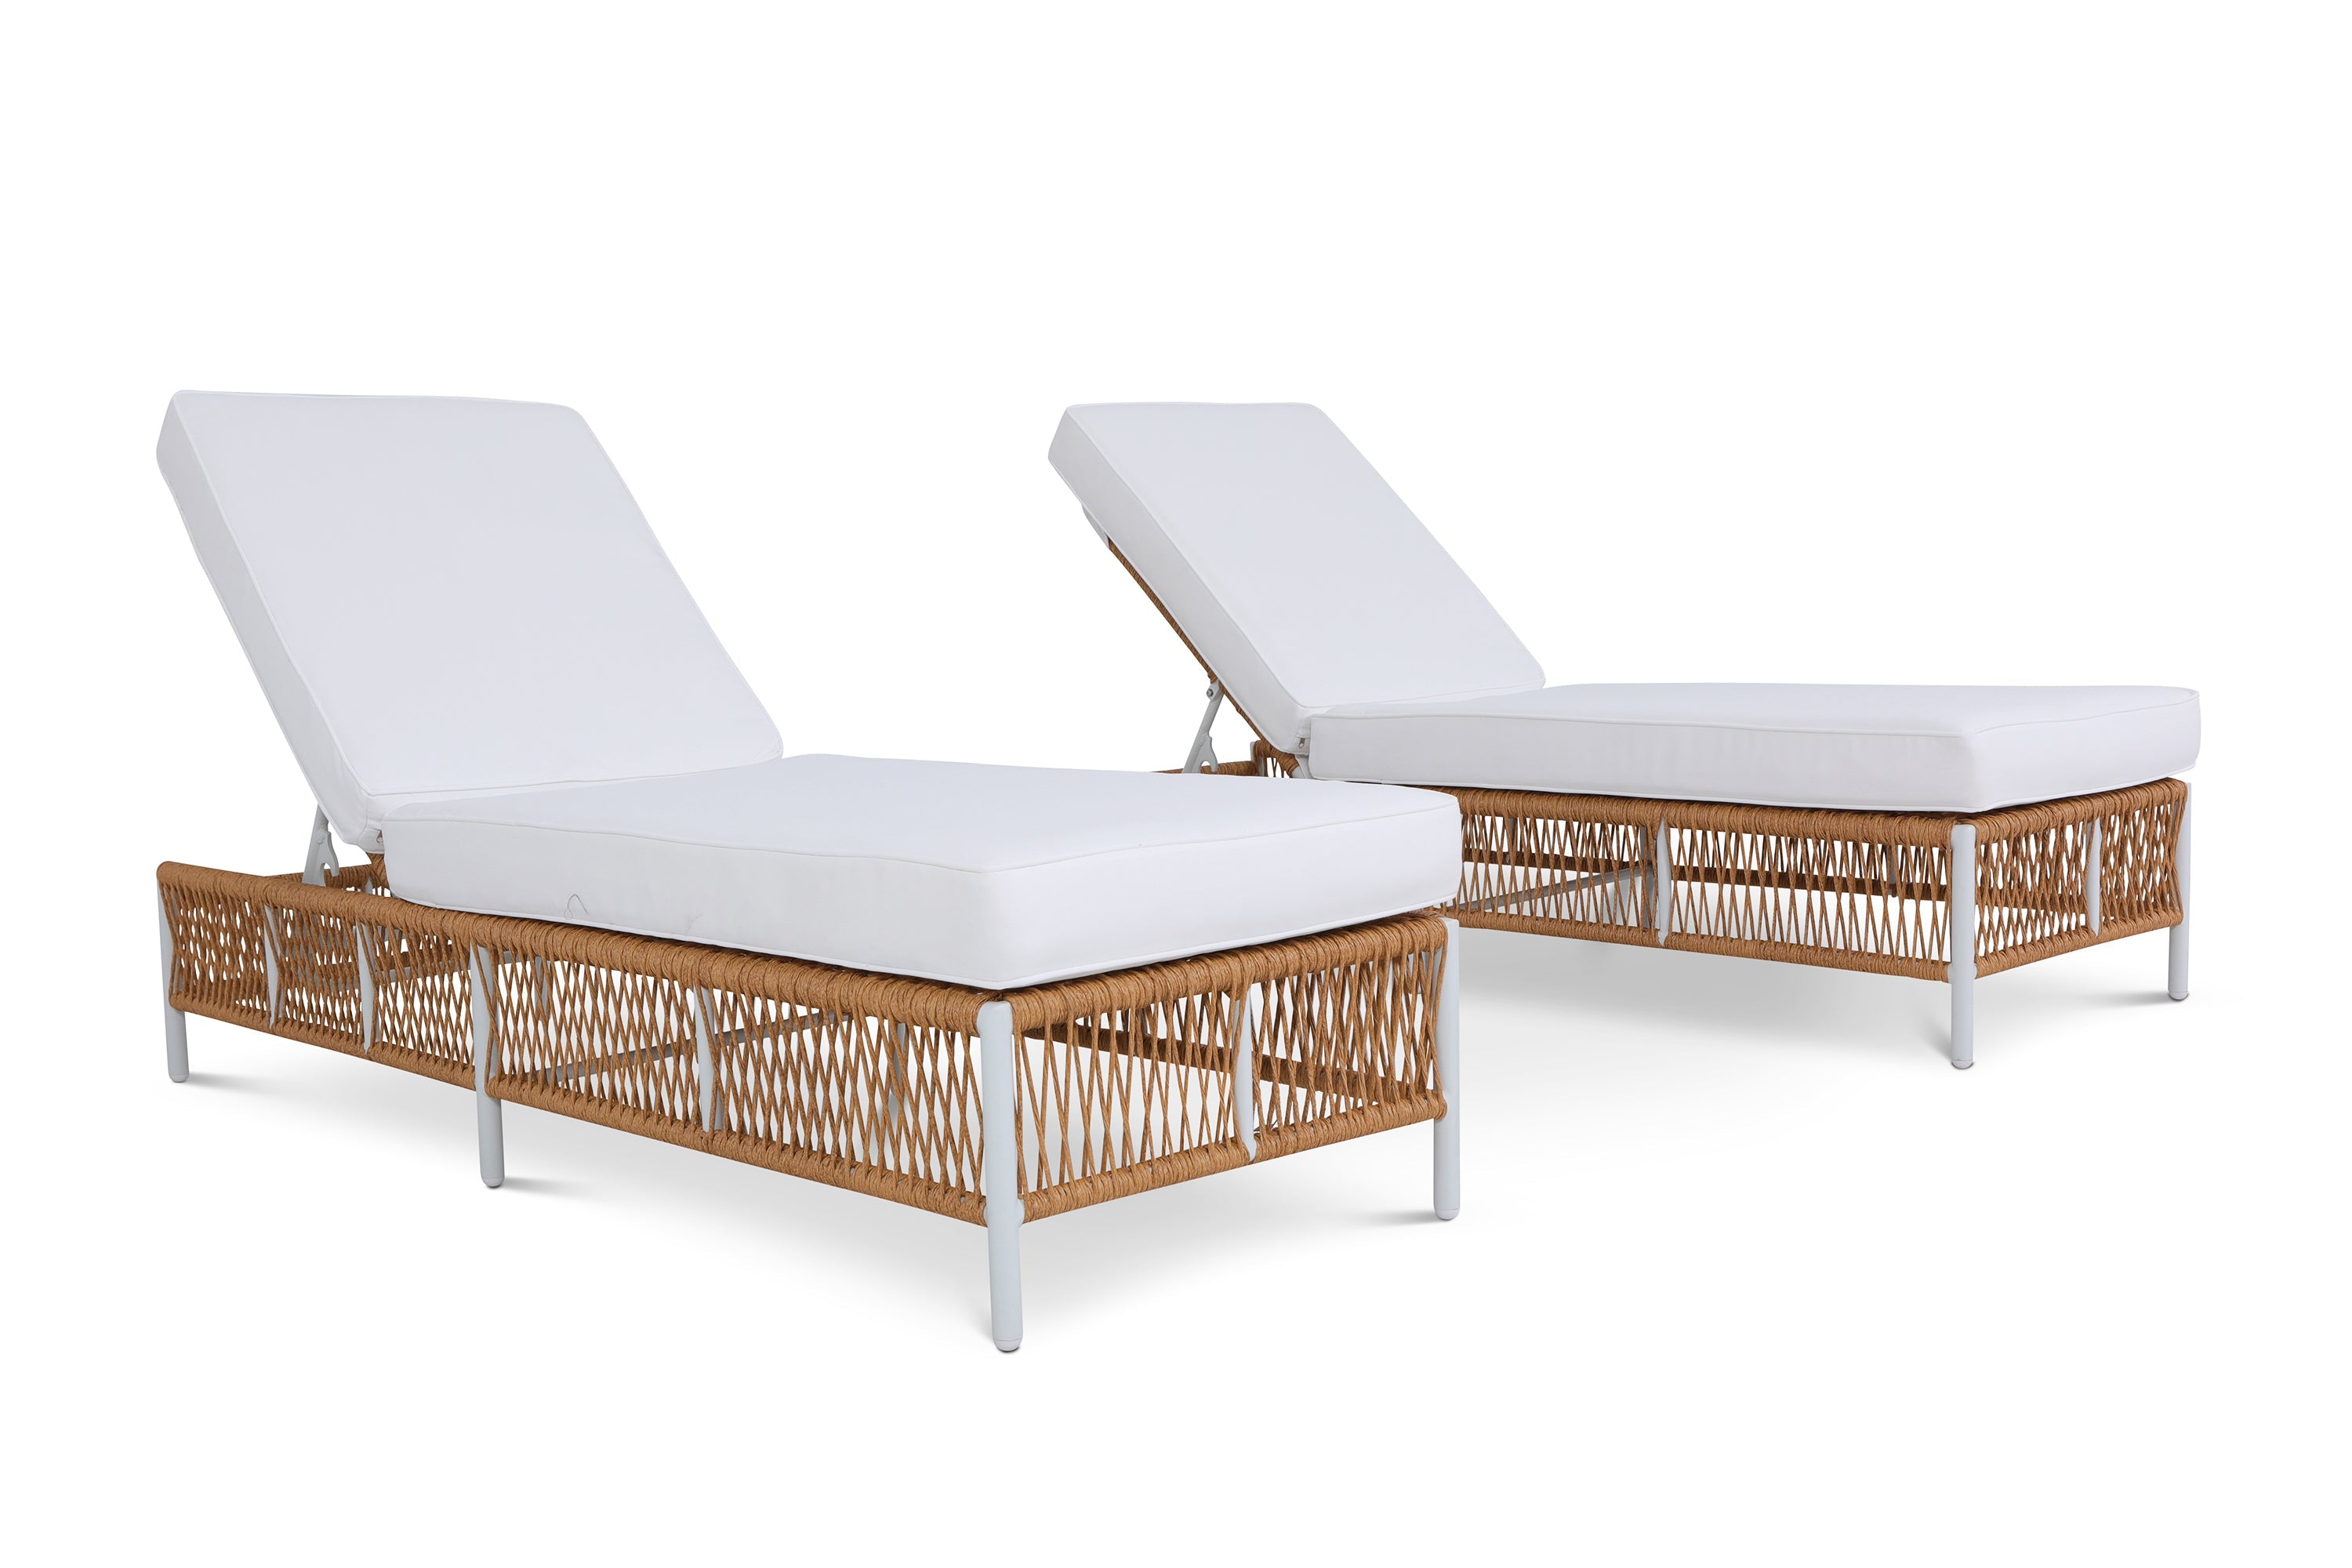 Olivia Ivory 2 Piece Set of Outdoor Roped Wicker Chaise Lounges